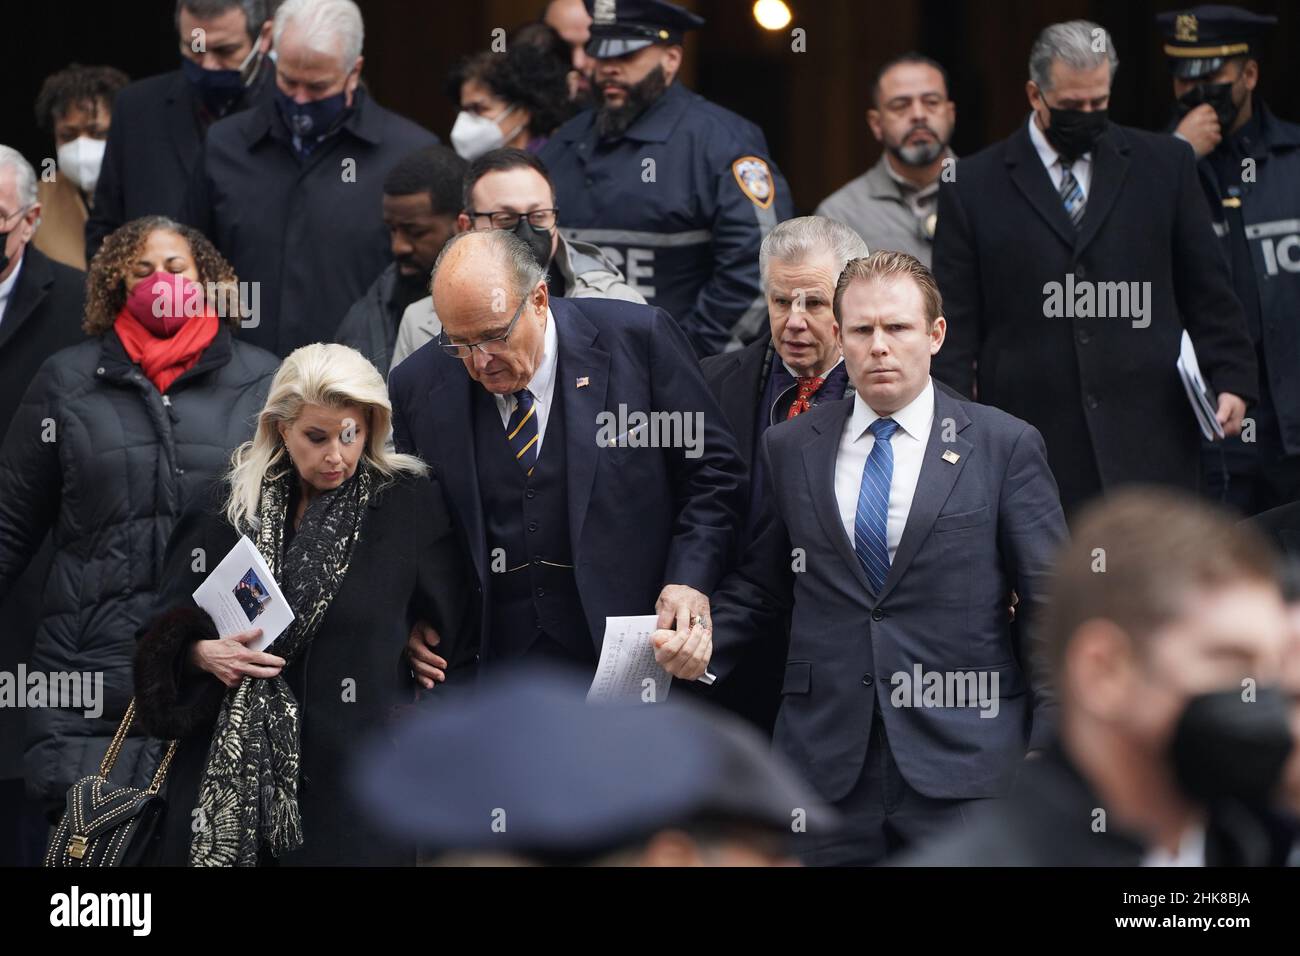 New York, United States. 01st Feb, 2022. Rudy Giuliani and his son Andrew exit St. Patrick's Cathedral at the funeral of NYPD Officer Wilbert Mora.For the second time in less than a week, mourners across New York City and the country came together to bid a final farewell to a fallen NYPD officer. Family, friends and a sea of brothers and sisters in blue gathered for the funeral for Officer Wilbert Mora at St. Patrick's Cathedral in Midtown Manhattan, with burial following in Woodside, Queens. Credit: SOPA Images Limited/Alamy Live News Stock Photo